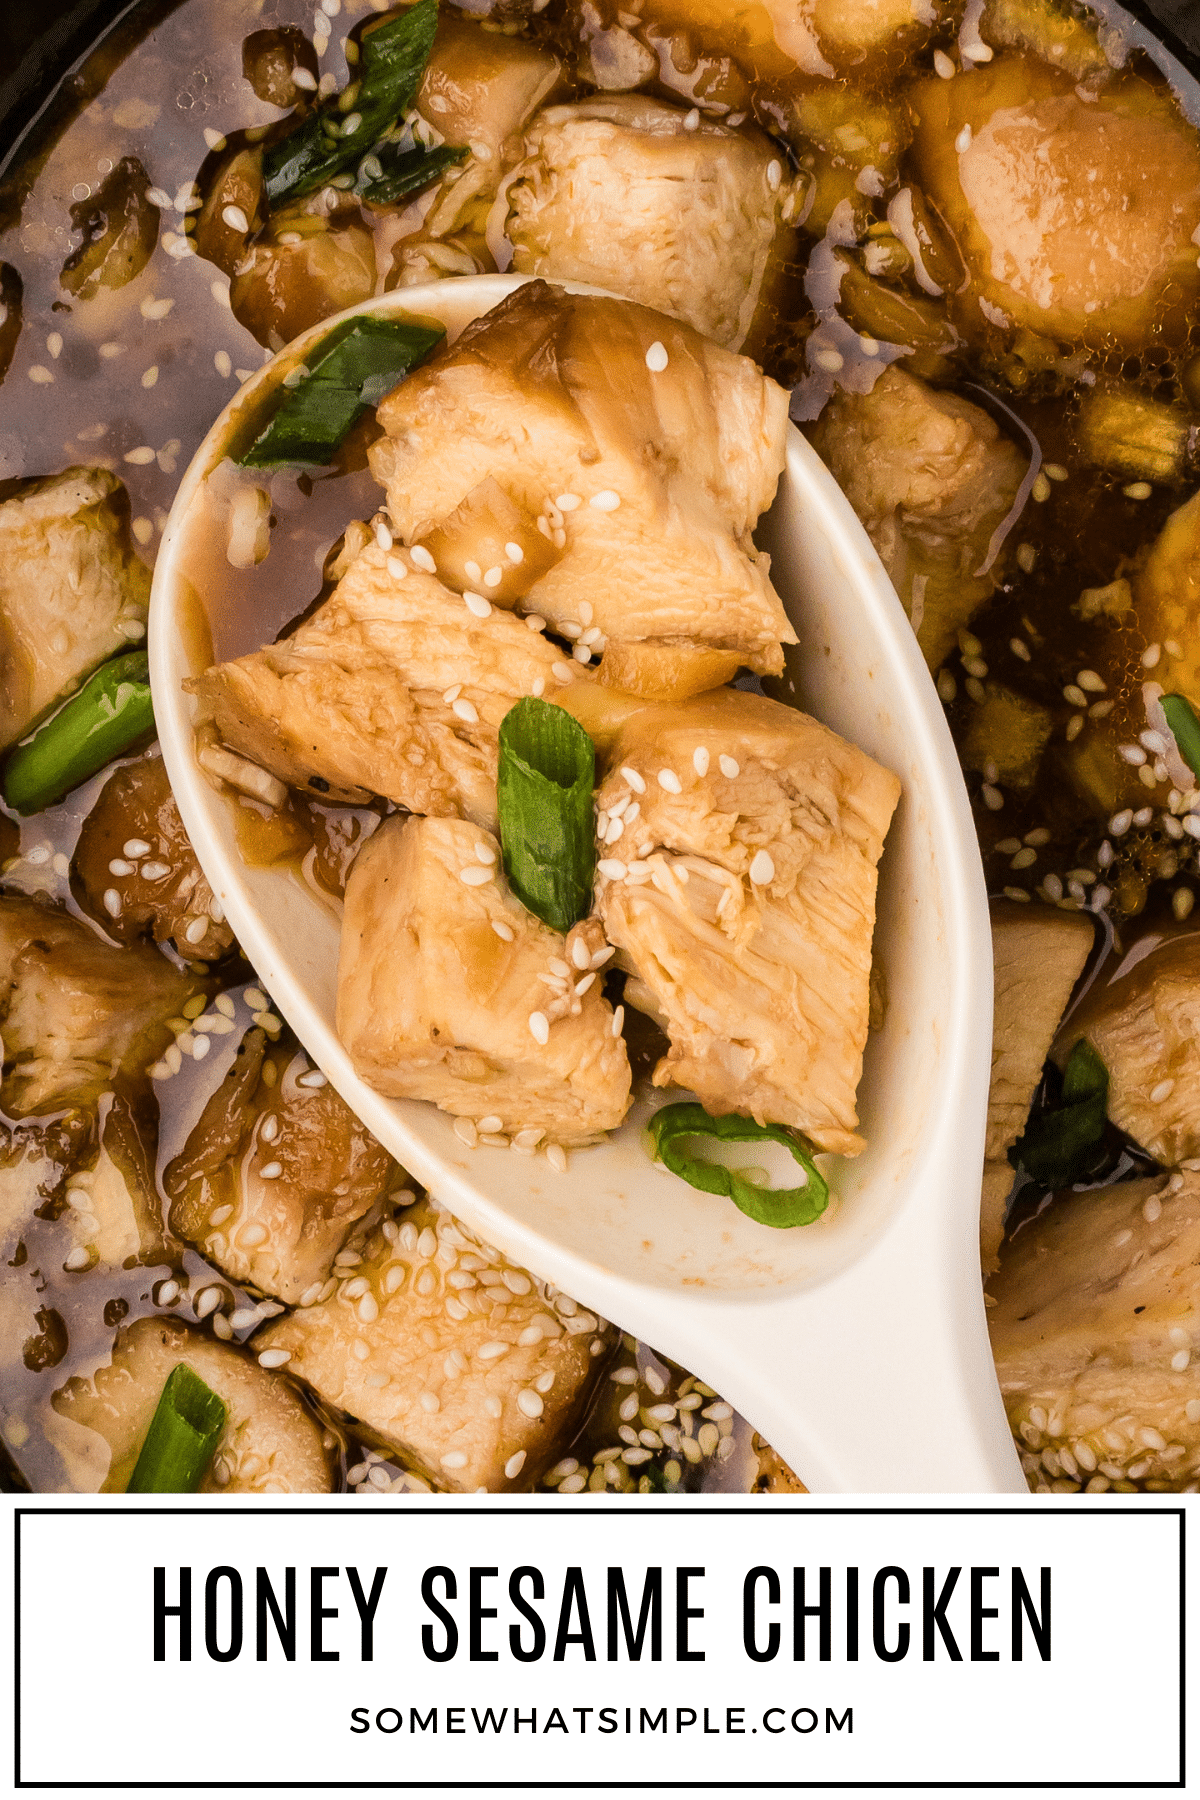 Honey sesame chicken made with chunks of slow-cooked chicken smothered in a sweet and savory honey garlic and soy sauce is garnished with sesame seeds and served hot over a bed of rice. This simple meal idea is basically a dump-and-set recipe that packs a ton of flavor into every bite! via @somewhatsimple